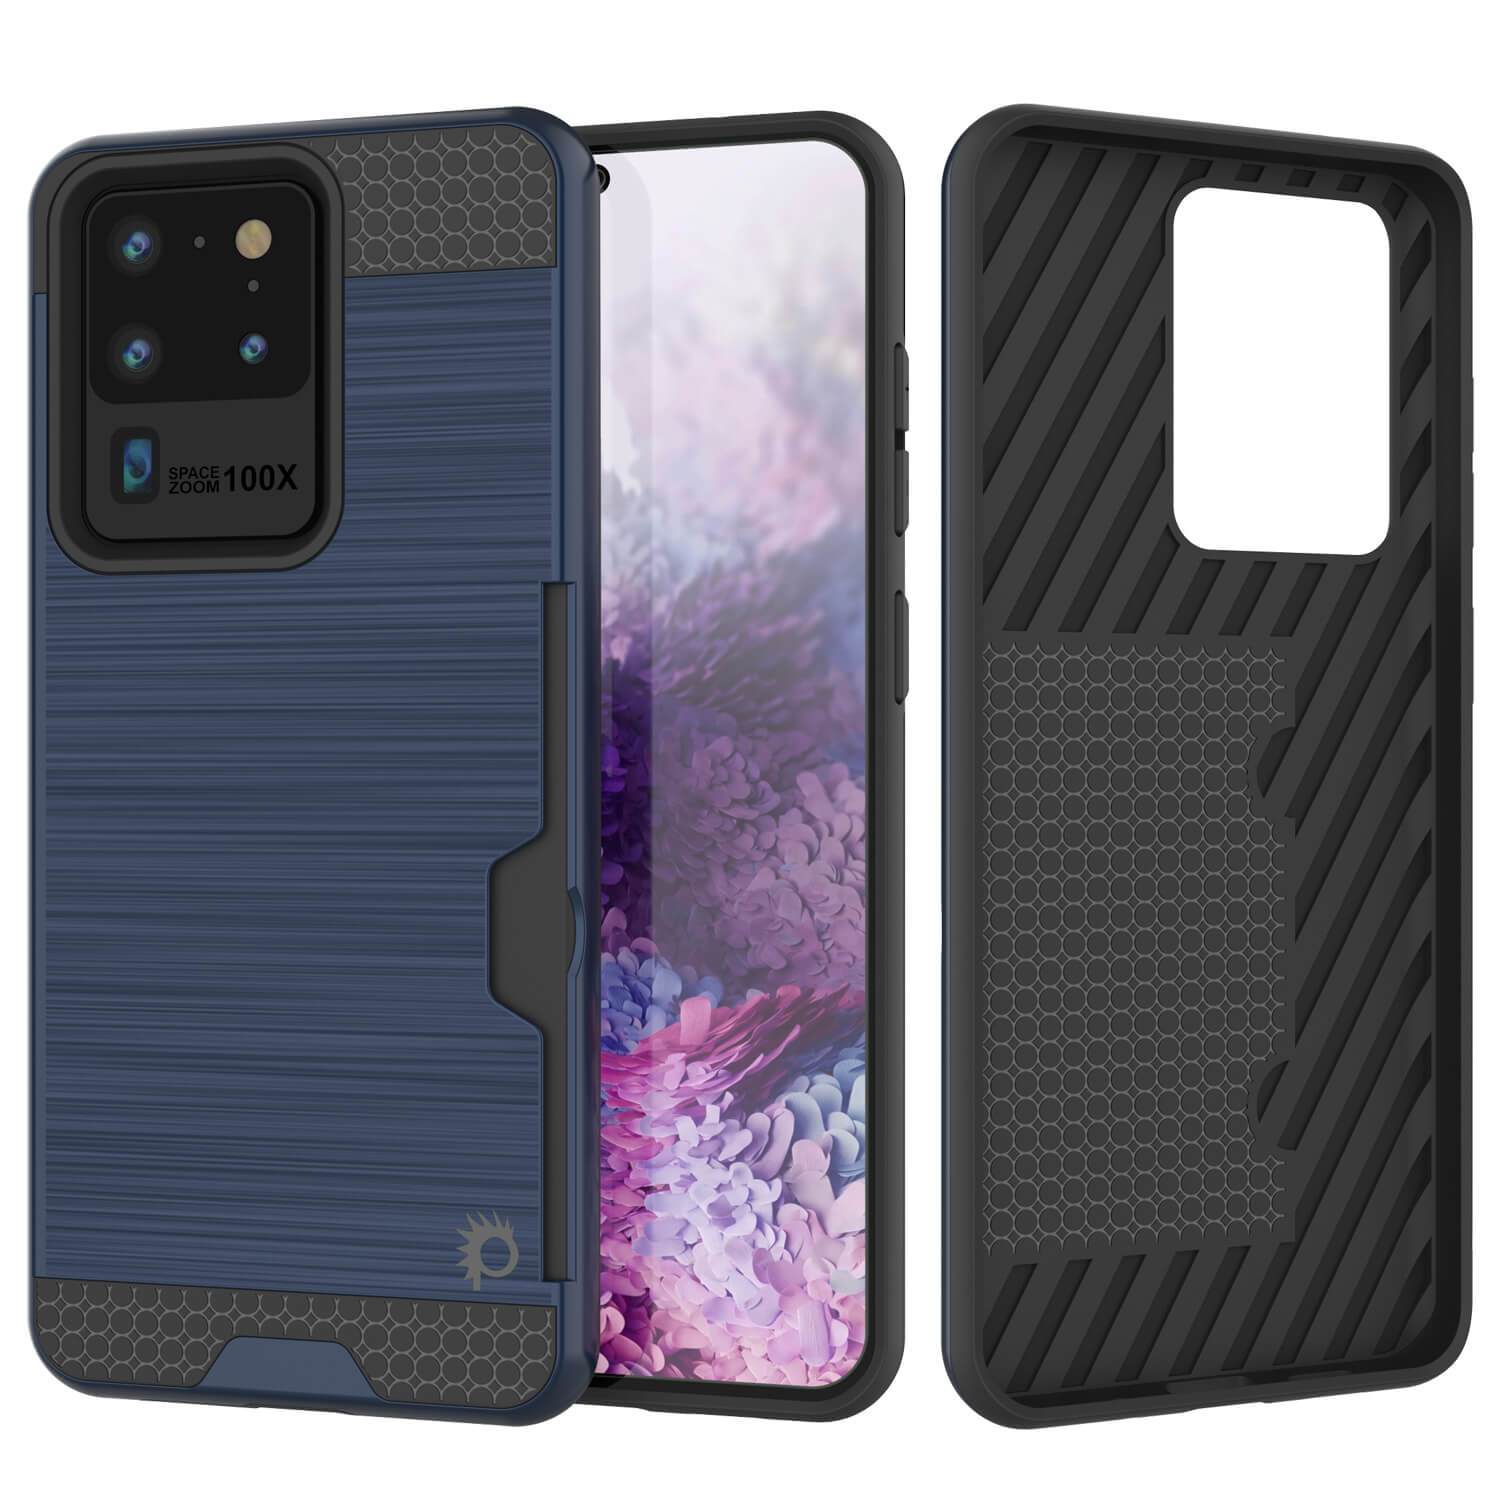 Galaxy S20 Ultra Case, PUNKcase [SLOT Series] [Slim Fit] Dual-Layer Armor Cover w/Integrated Anti-Shock System, Credit Card Slot [Navy]